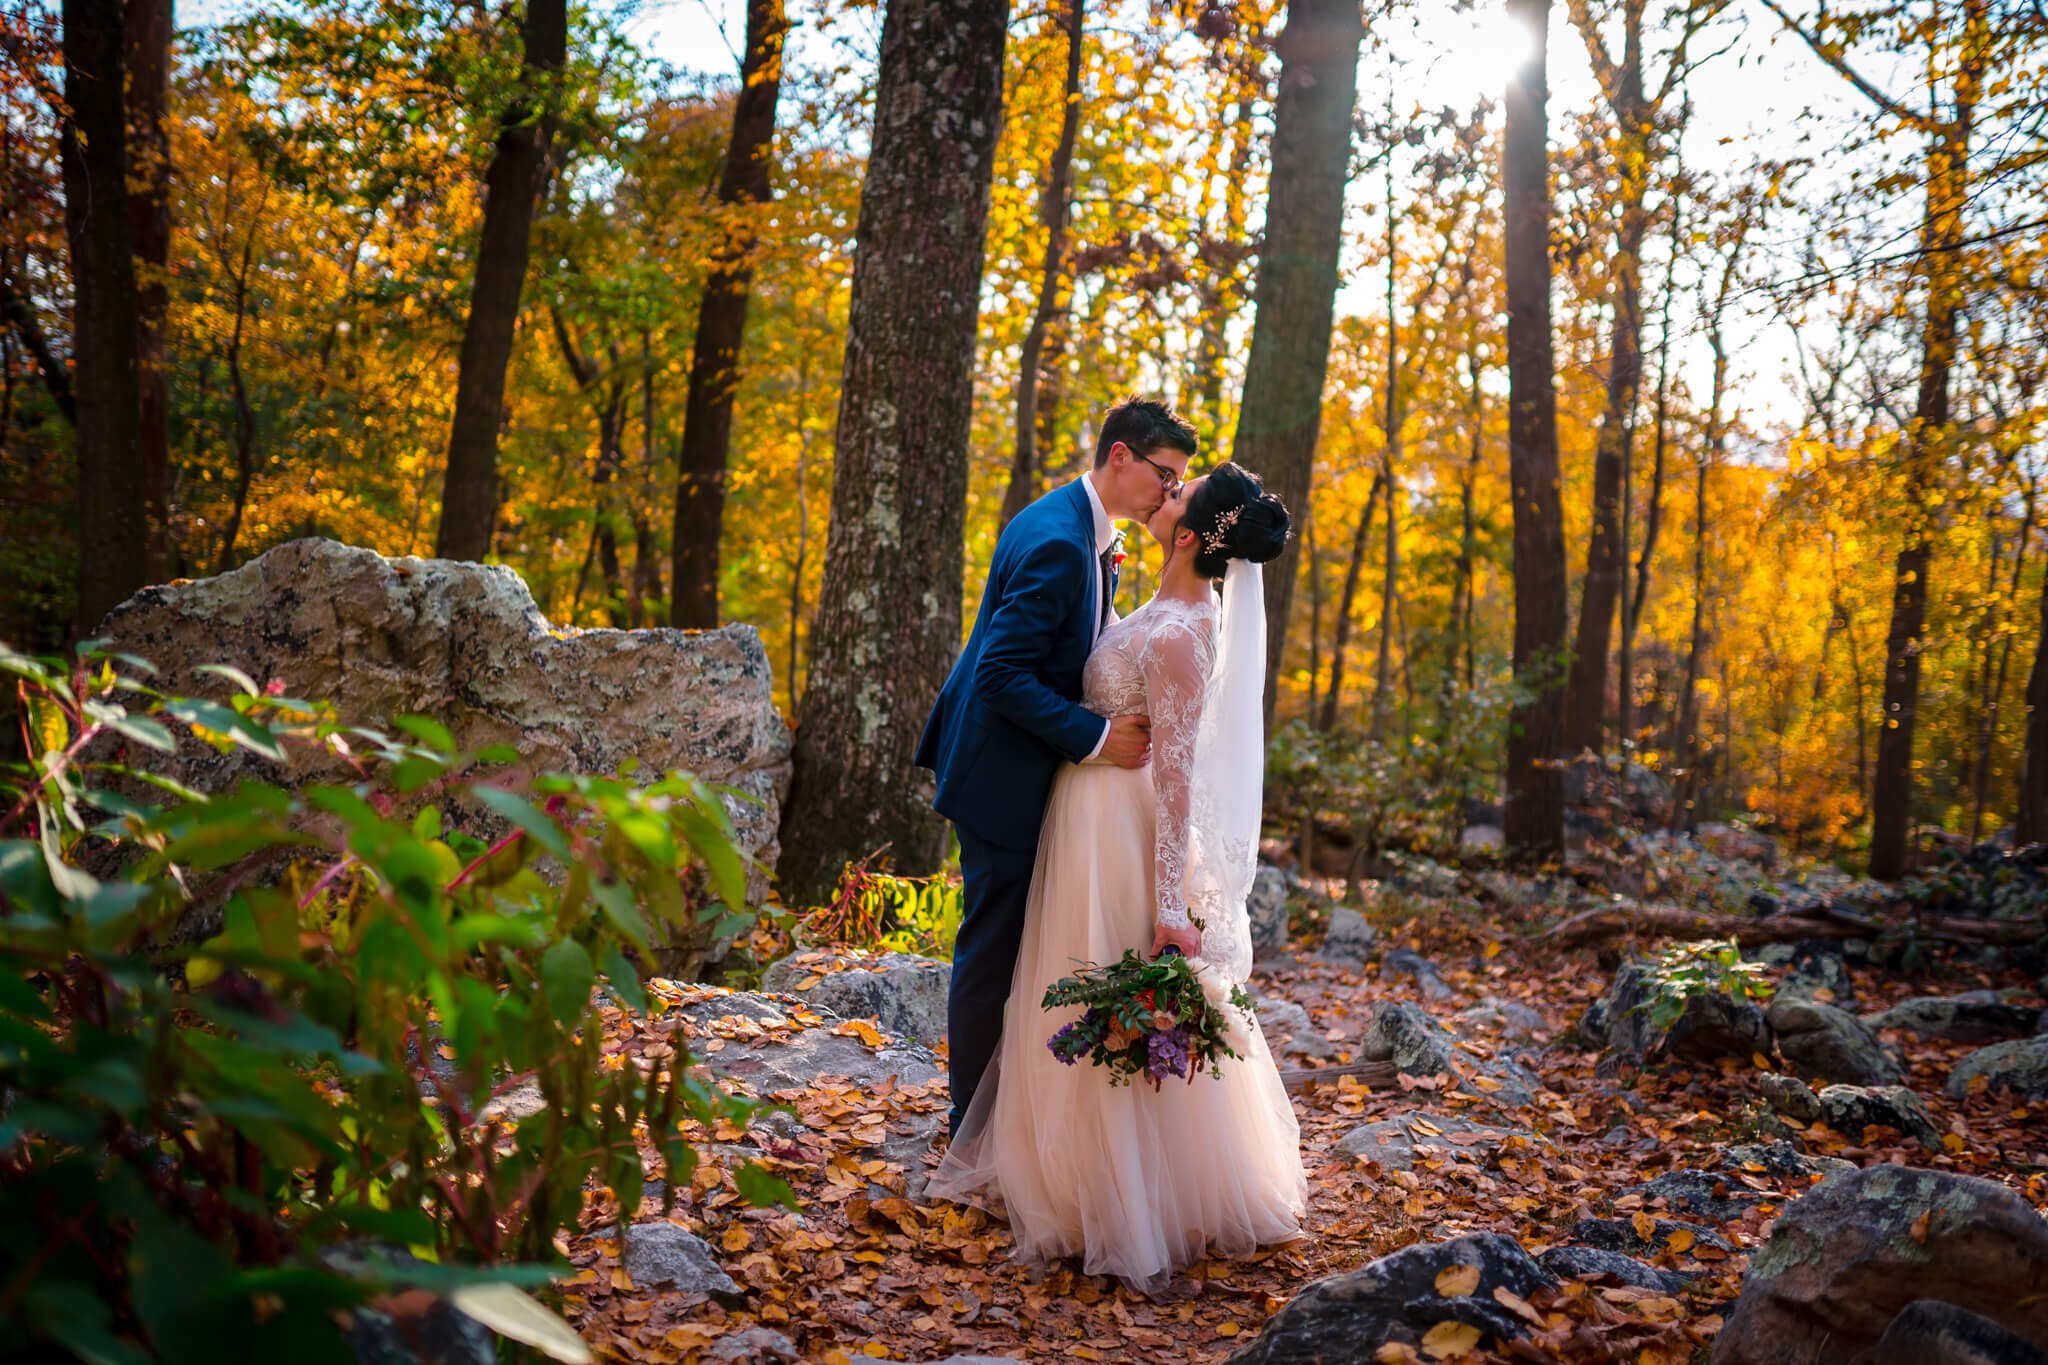 02-Ayla-Lee-Sugarloaf-Mountain-Elopement-Autumn-Summit-Wedding-Ceremony-Photography-by-Bee-Two-Sweet-12.jpg